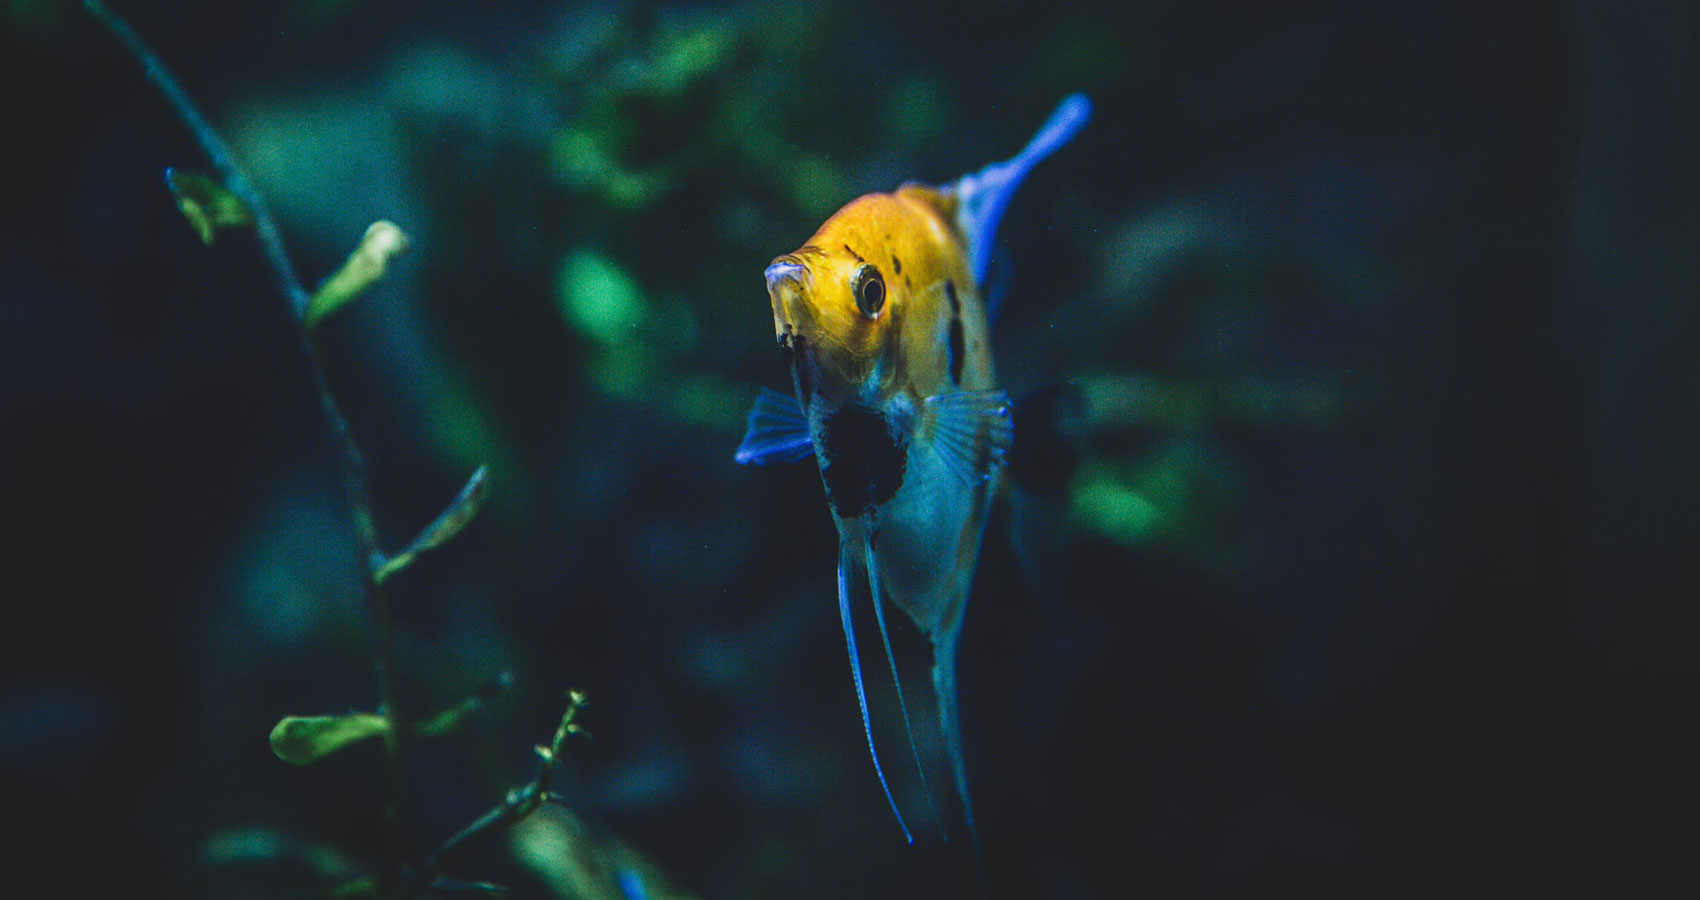 Angel Fish, micropoetry written by J C Thomas at Spillwords.com